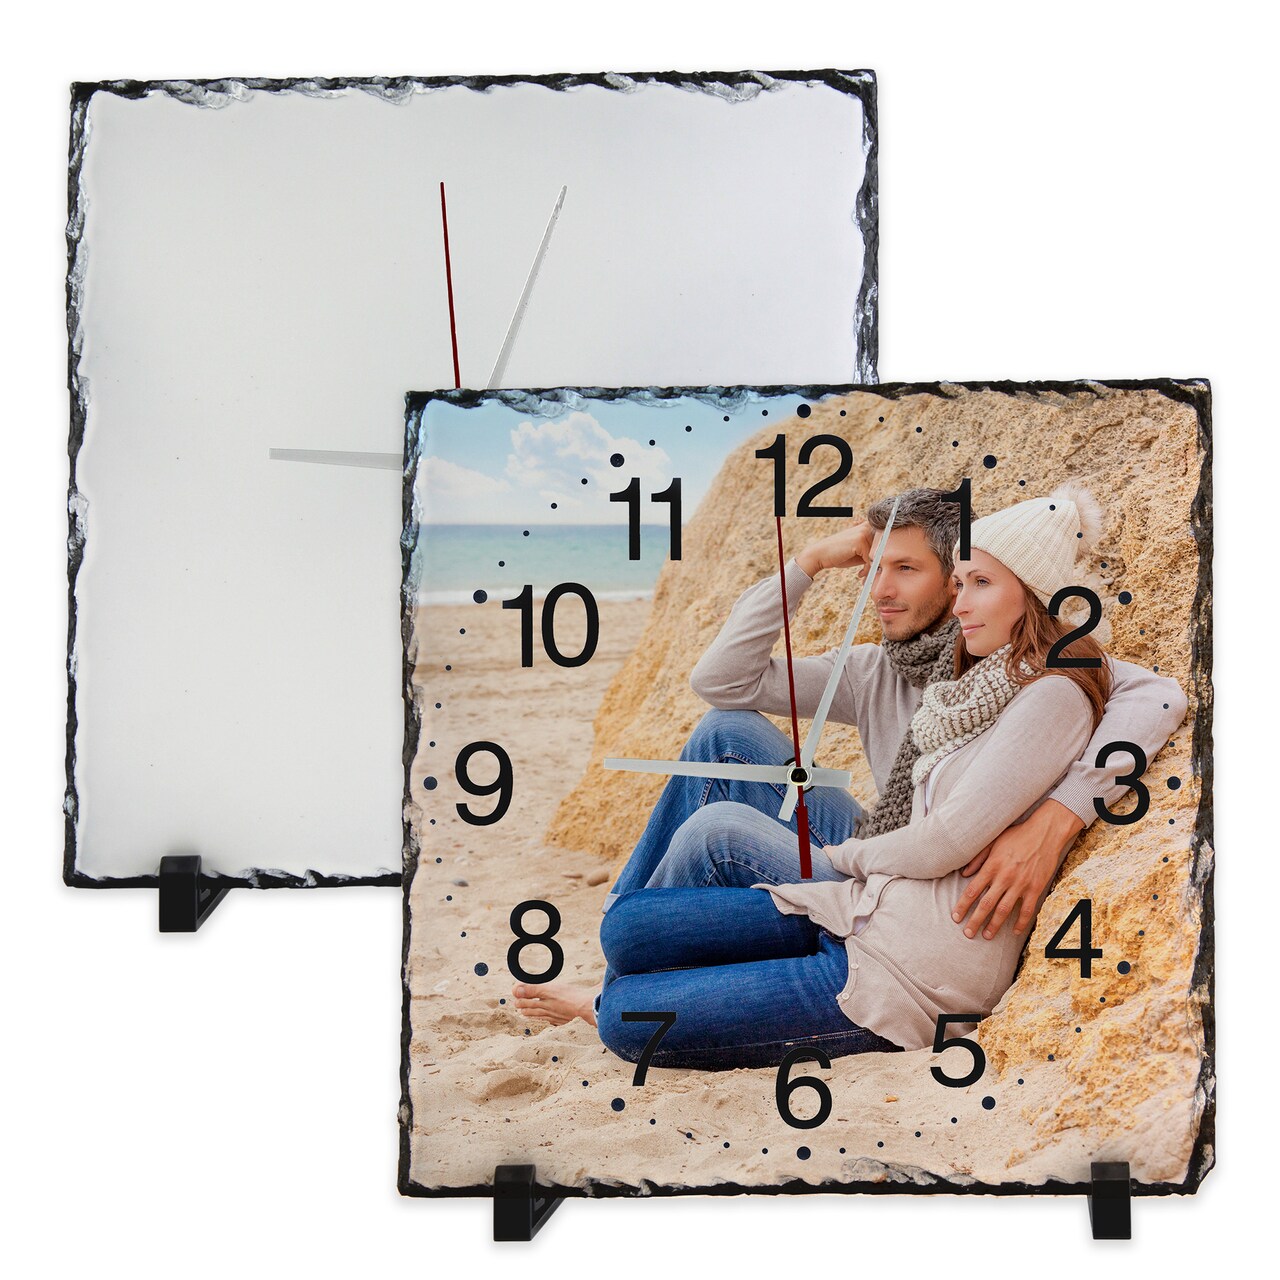 SubliSLATE Sublimation Slate Blank, Clock. Includes Black Display Feet for  Photo Quality Sublimation Printing with Clock Mechanism